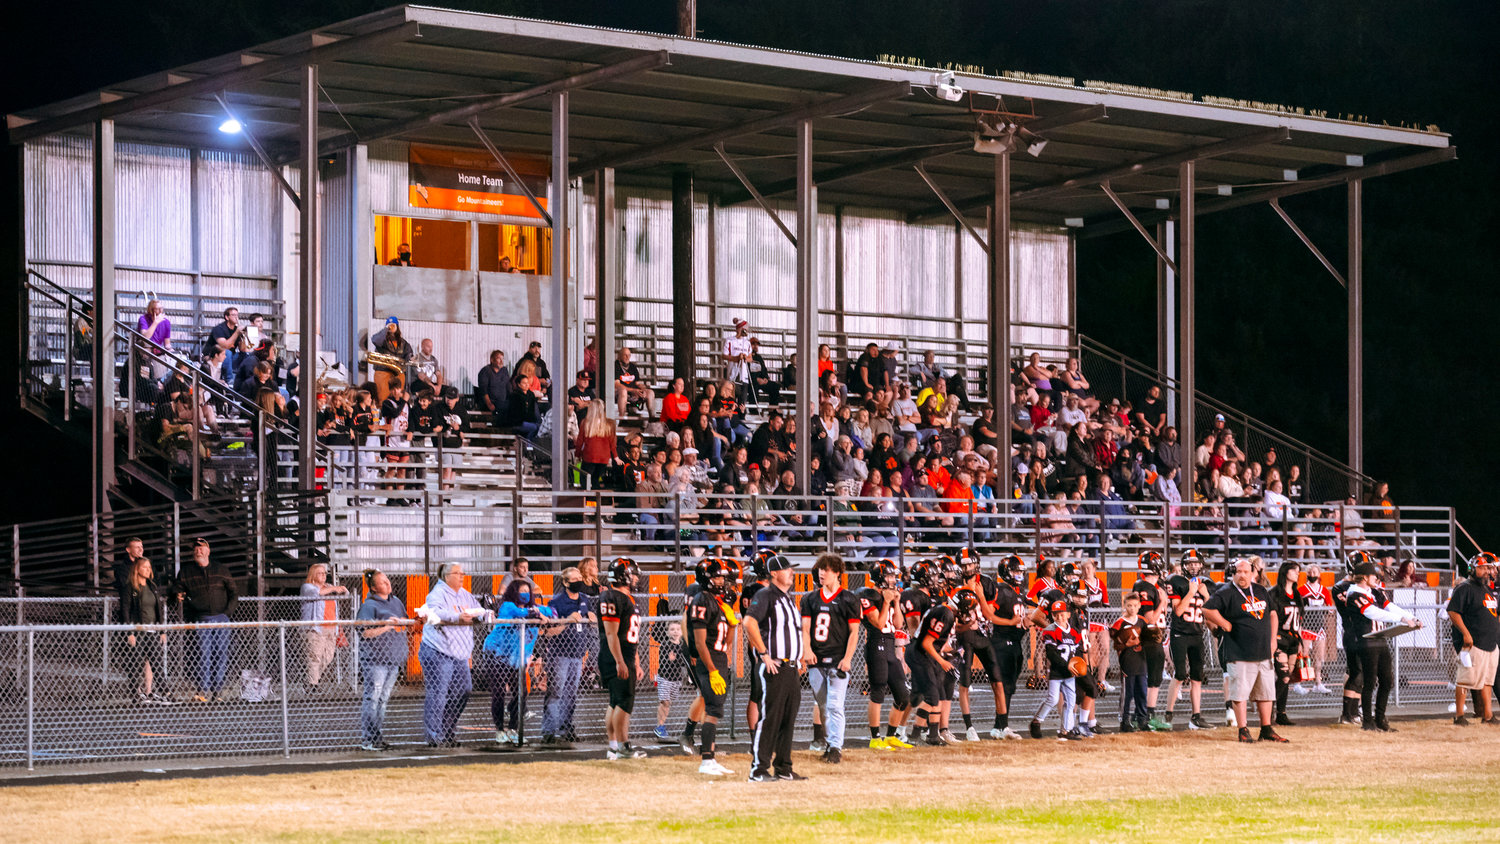 Fans fill the stands at Rainier High School as the Mountaineers face off against Toledo Friday night.